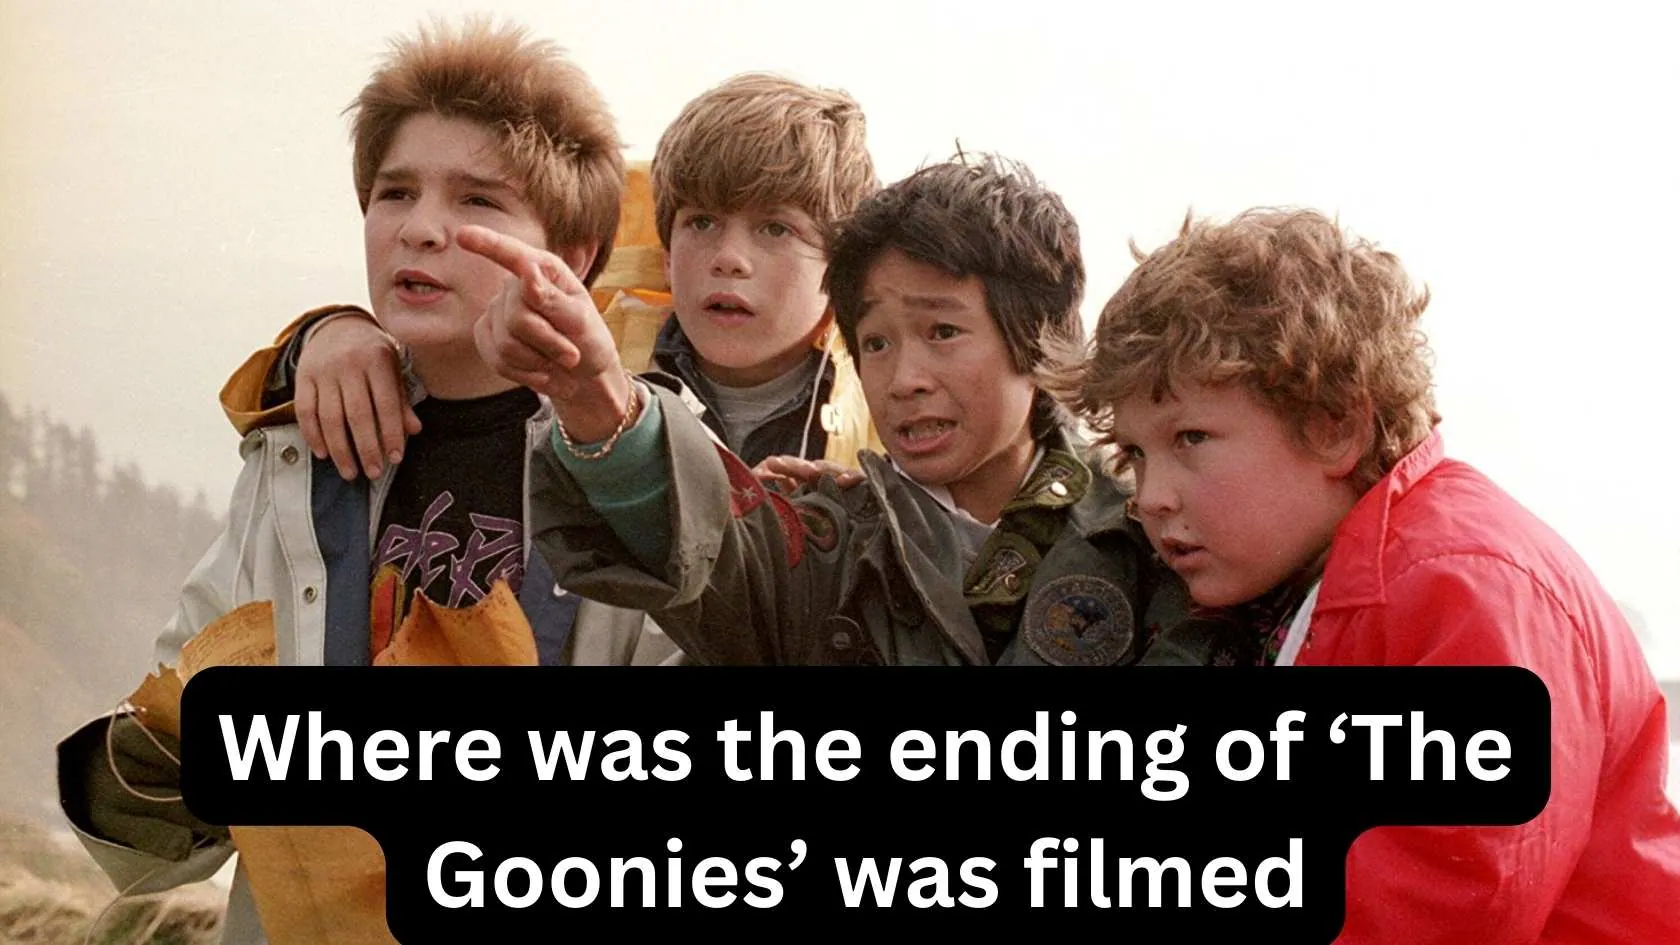 Explore the location Where the ending of ‘The Goonies’ was filmed